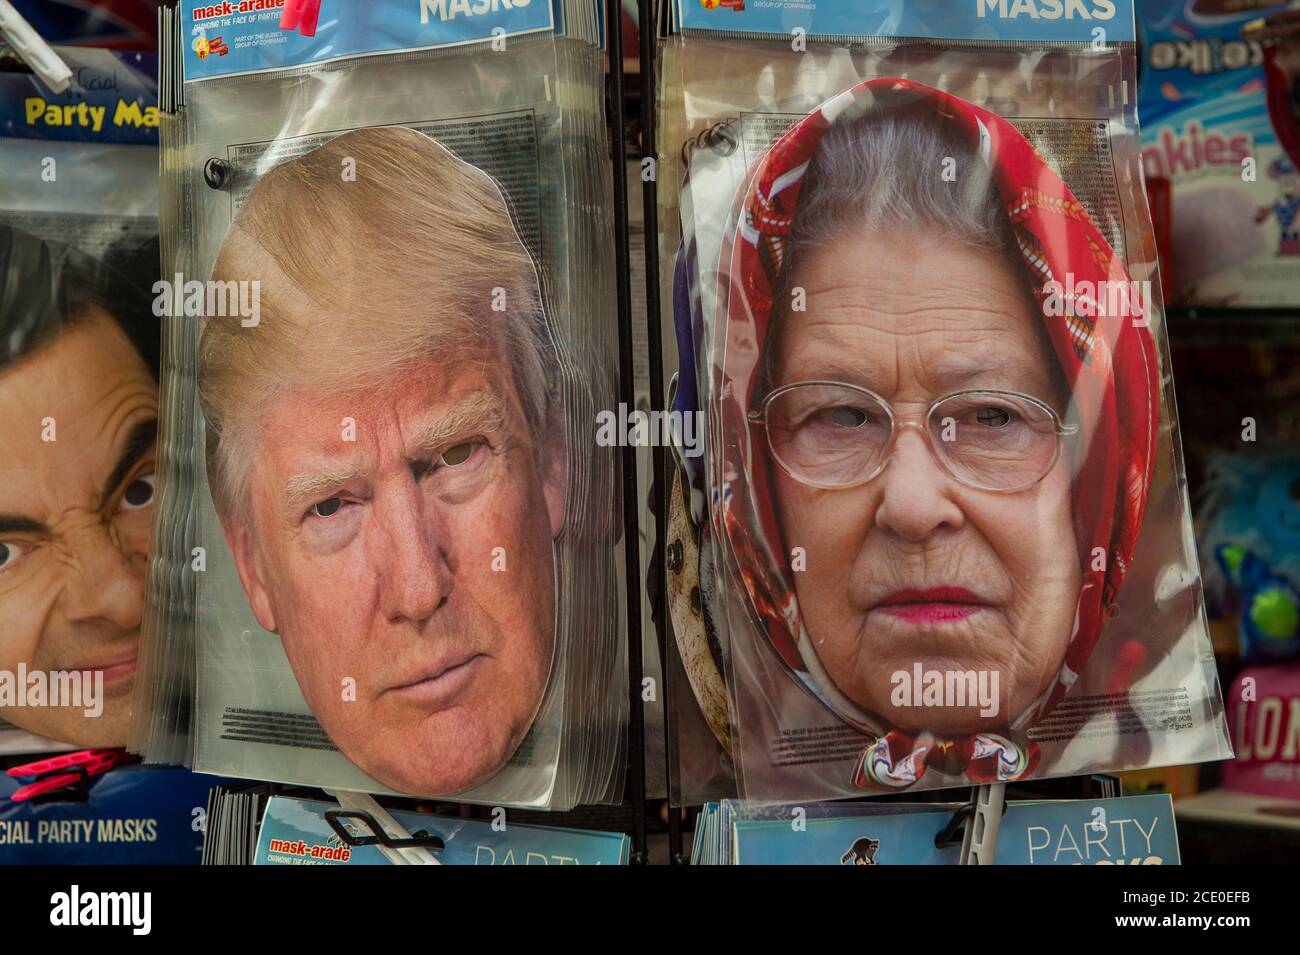 Windsor, Berkshire, UK. 30th August, 2020. Donald Trump and Her Majesty the Queen cardboard face masks for sale in a tourist shop in Windsor. Credit: Maureen McLean/Alamy Stock Photo